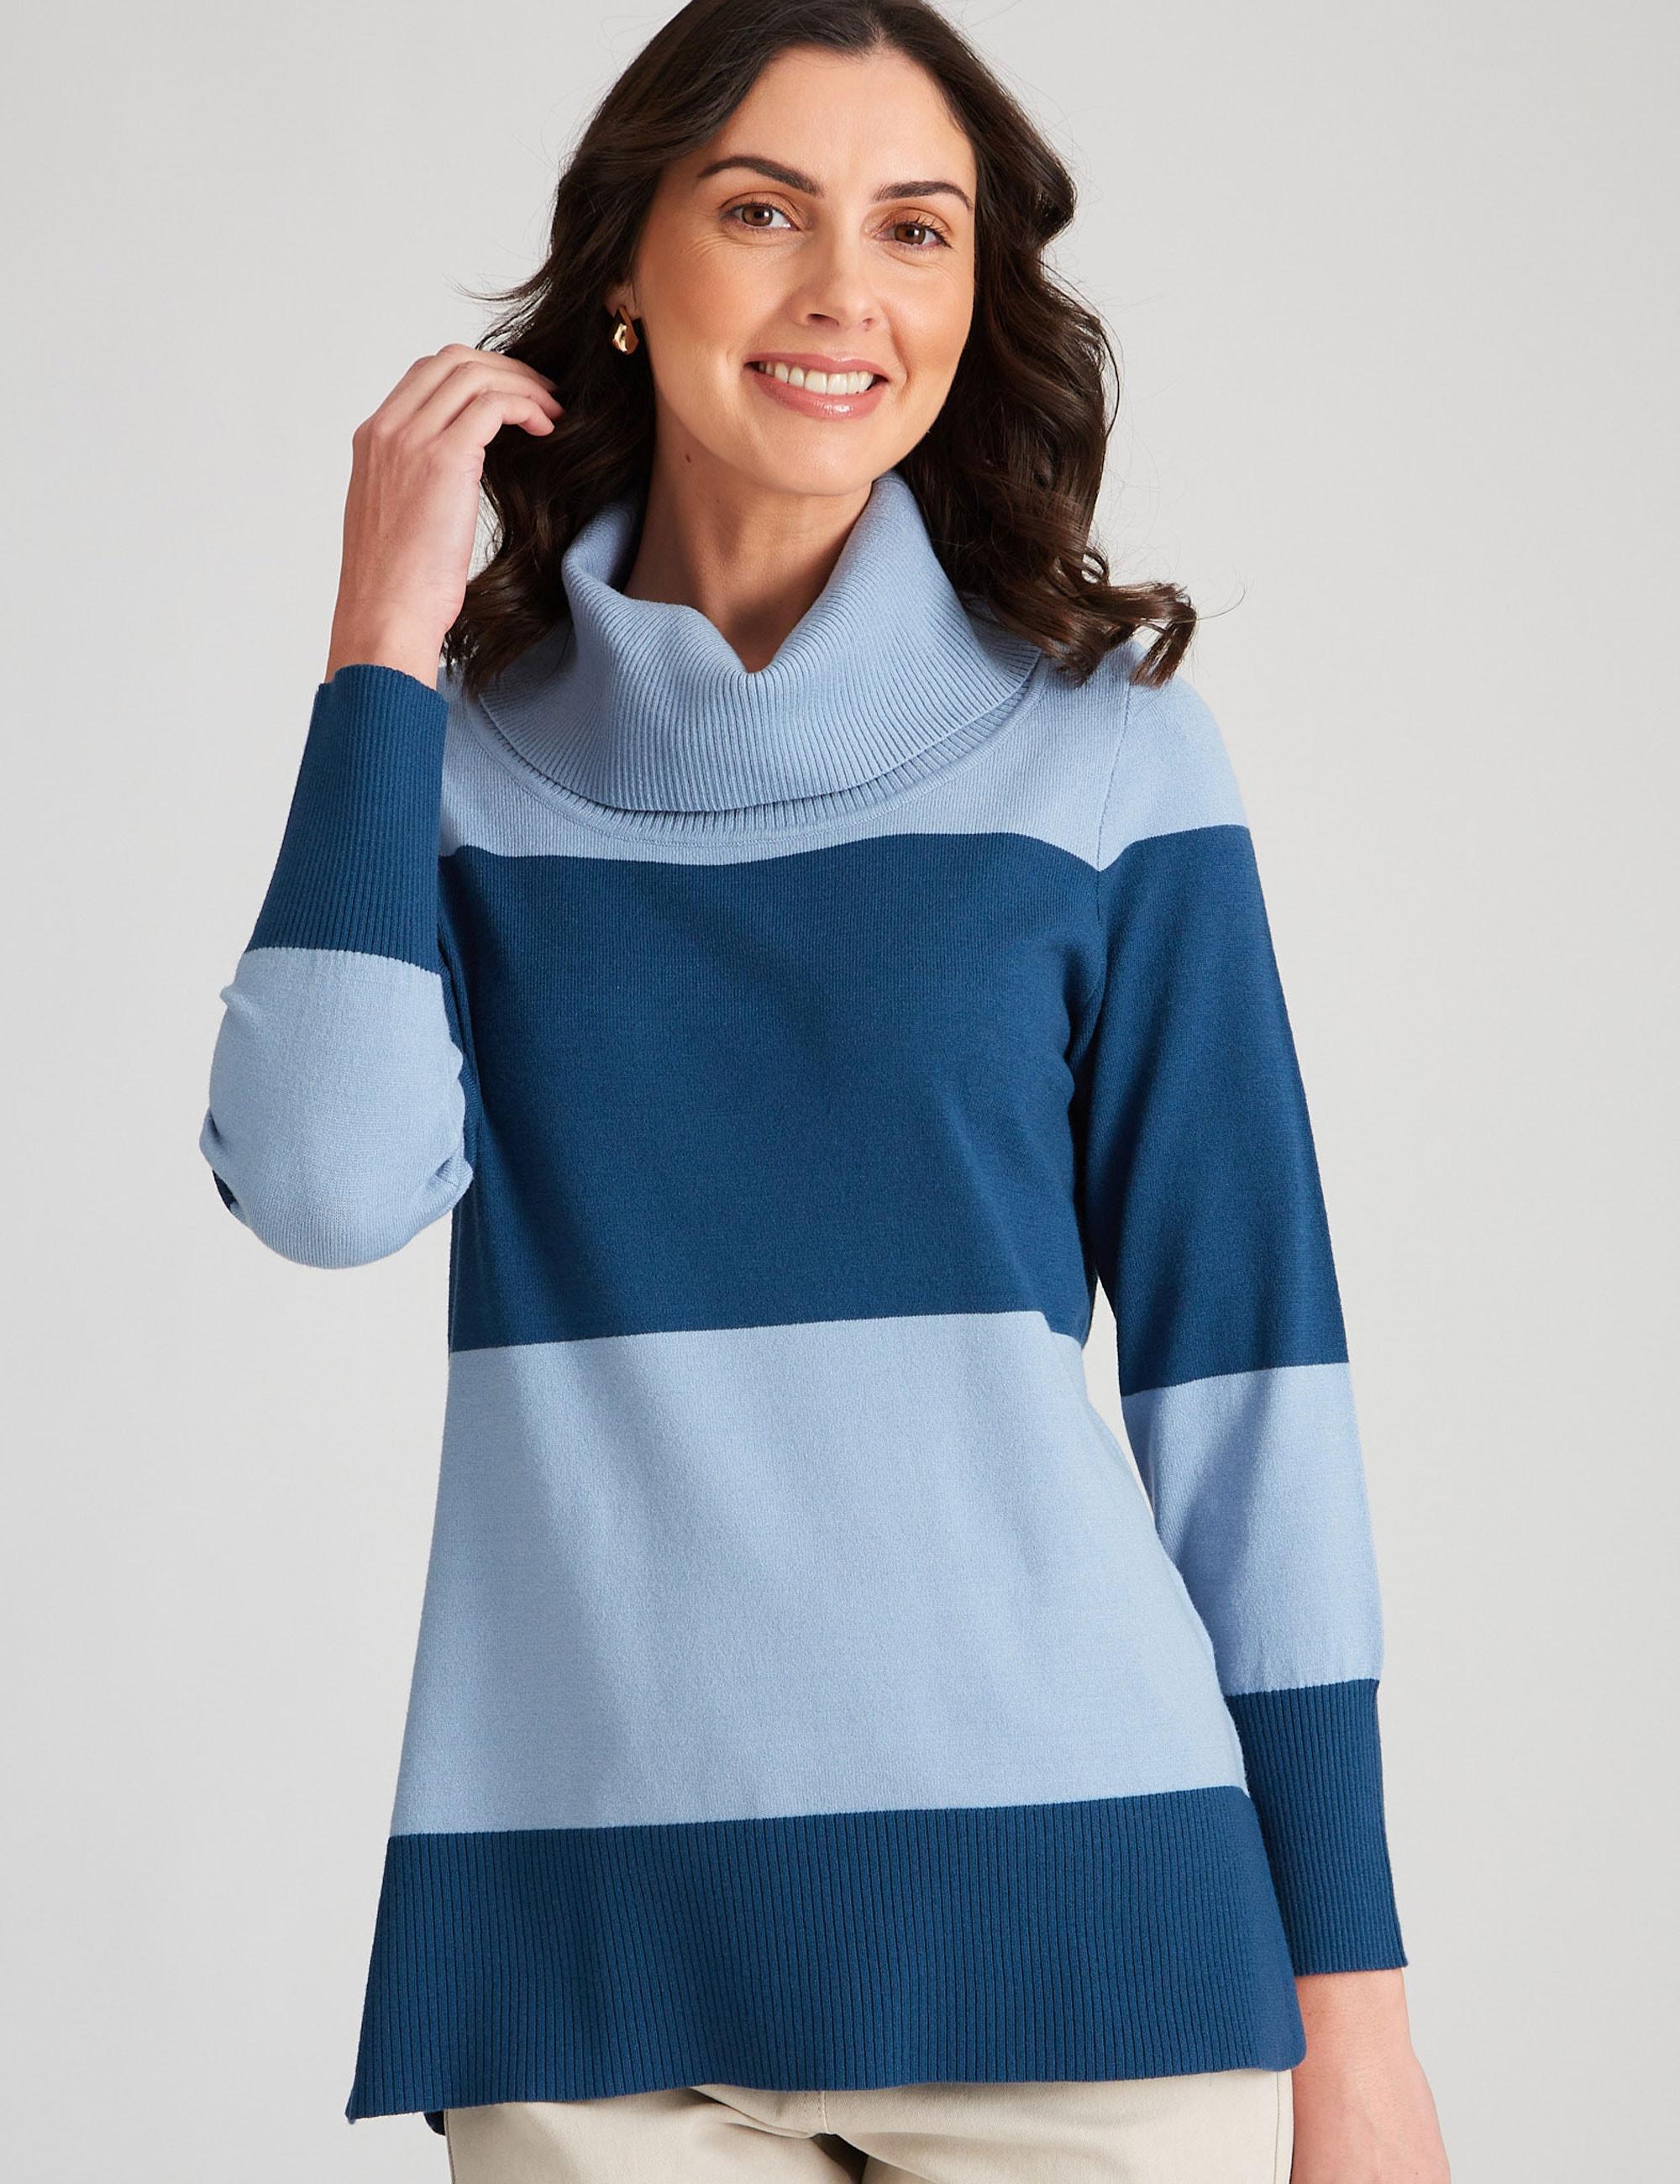 W LANE - Womens Jumper - Long Summer Sweater - Blue Pullover - Casual Clothing - Long Sleeve - Navy & Blue Striped - Oversized - Cowl Neck - Work Wear